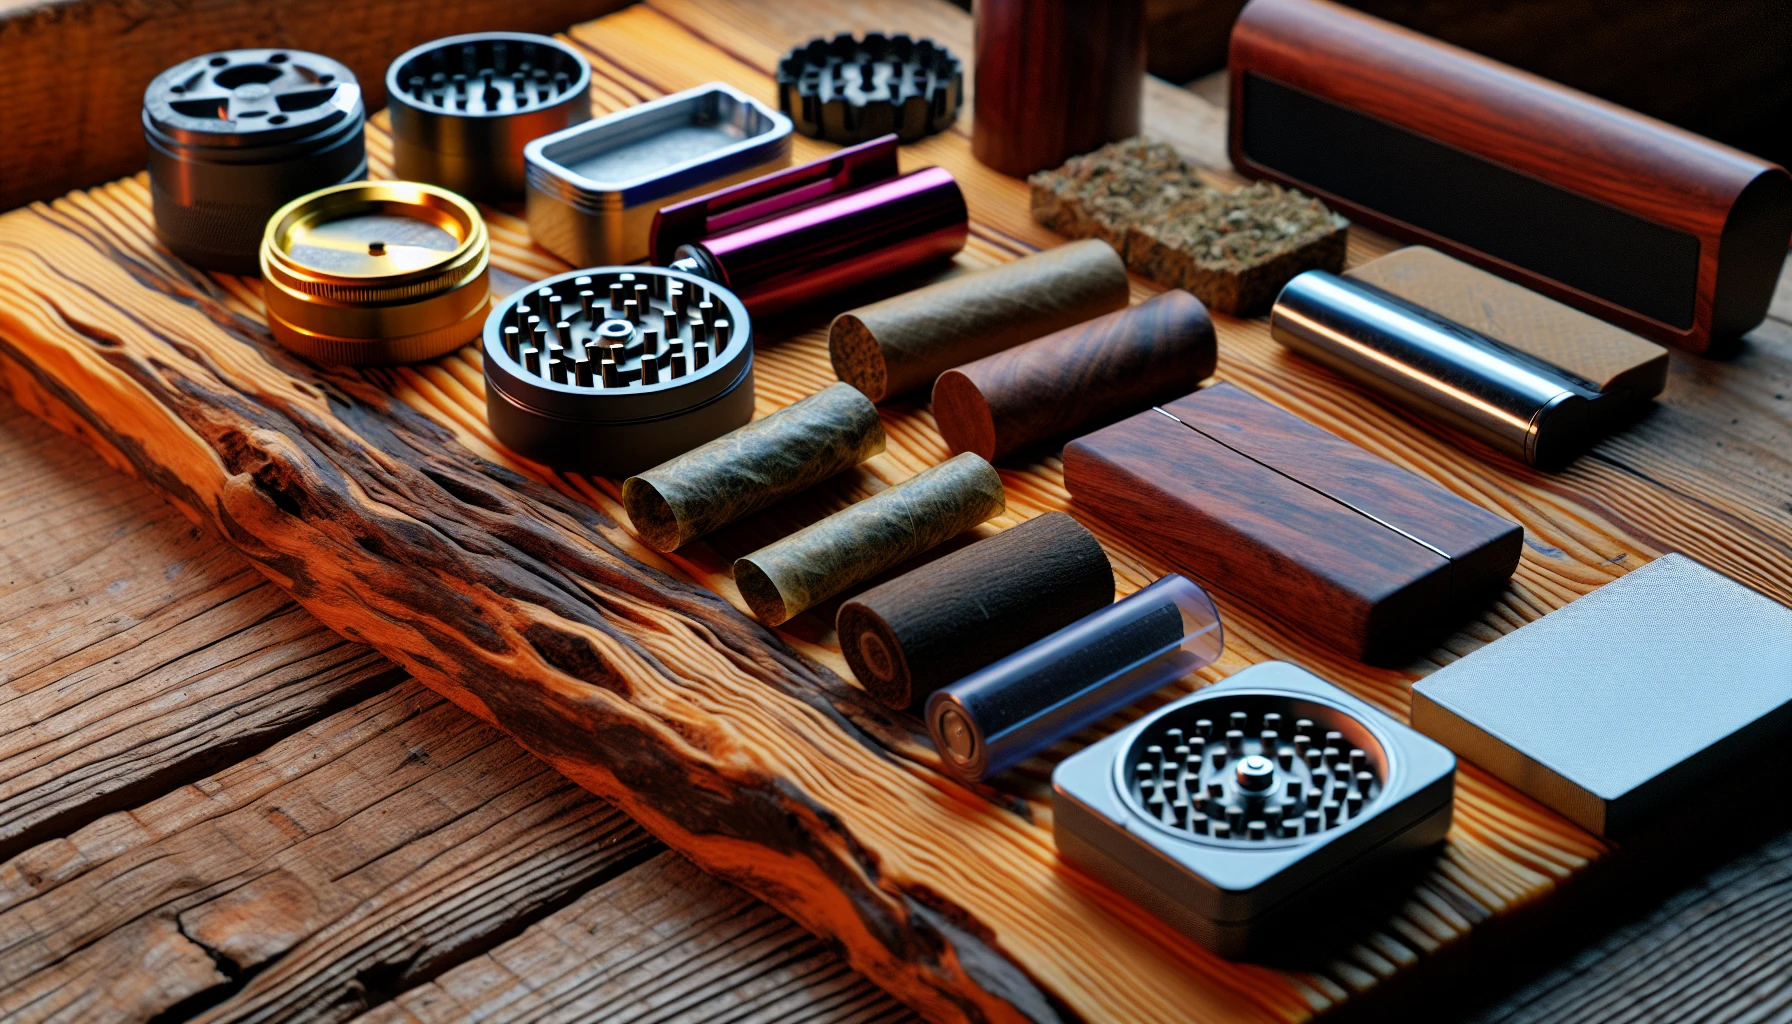 Various smoking accessories including rolling papers, grinders, and lighters